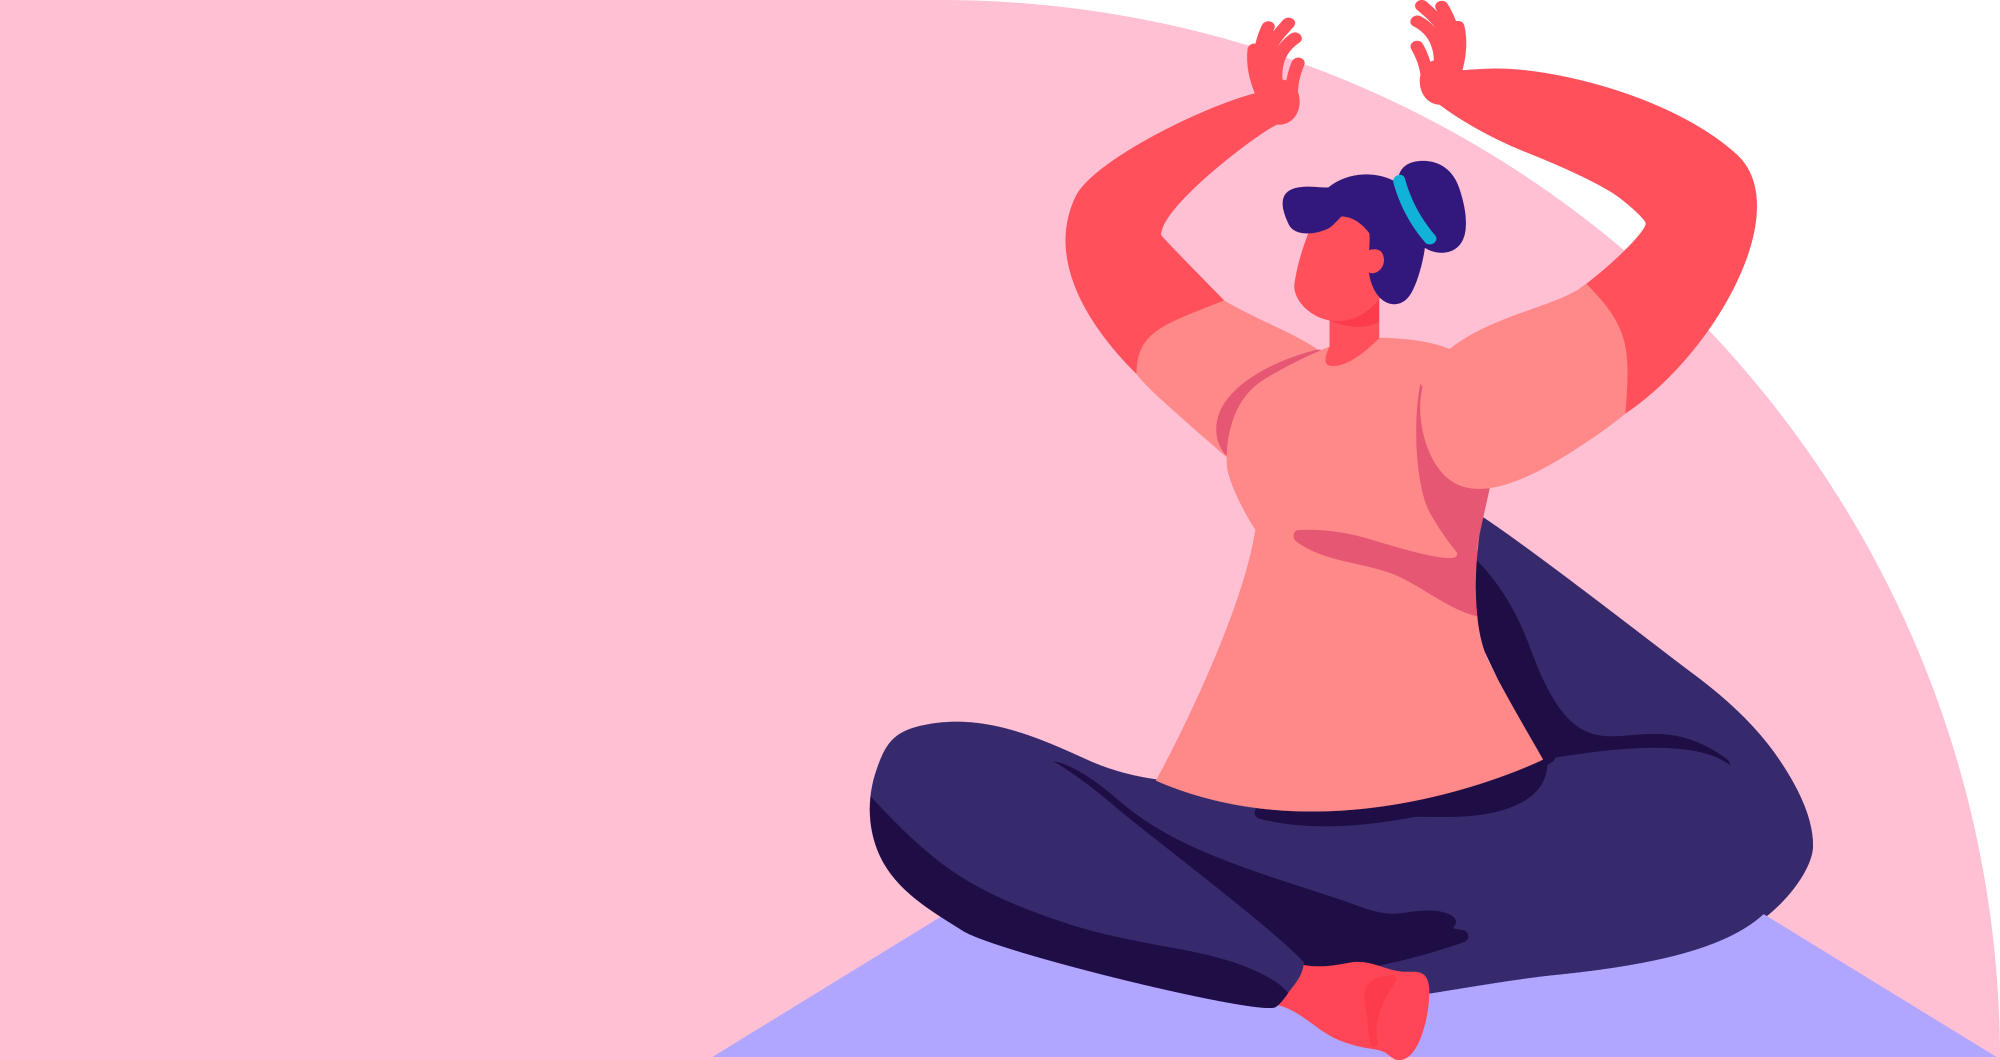 Period Yoga: 8 Poses to Ease Menstrual Cramps